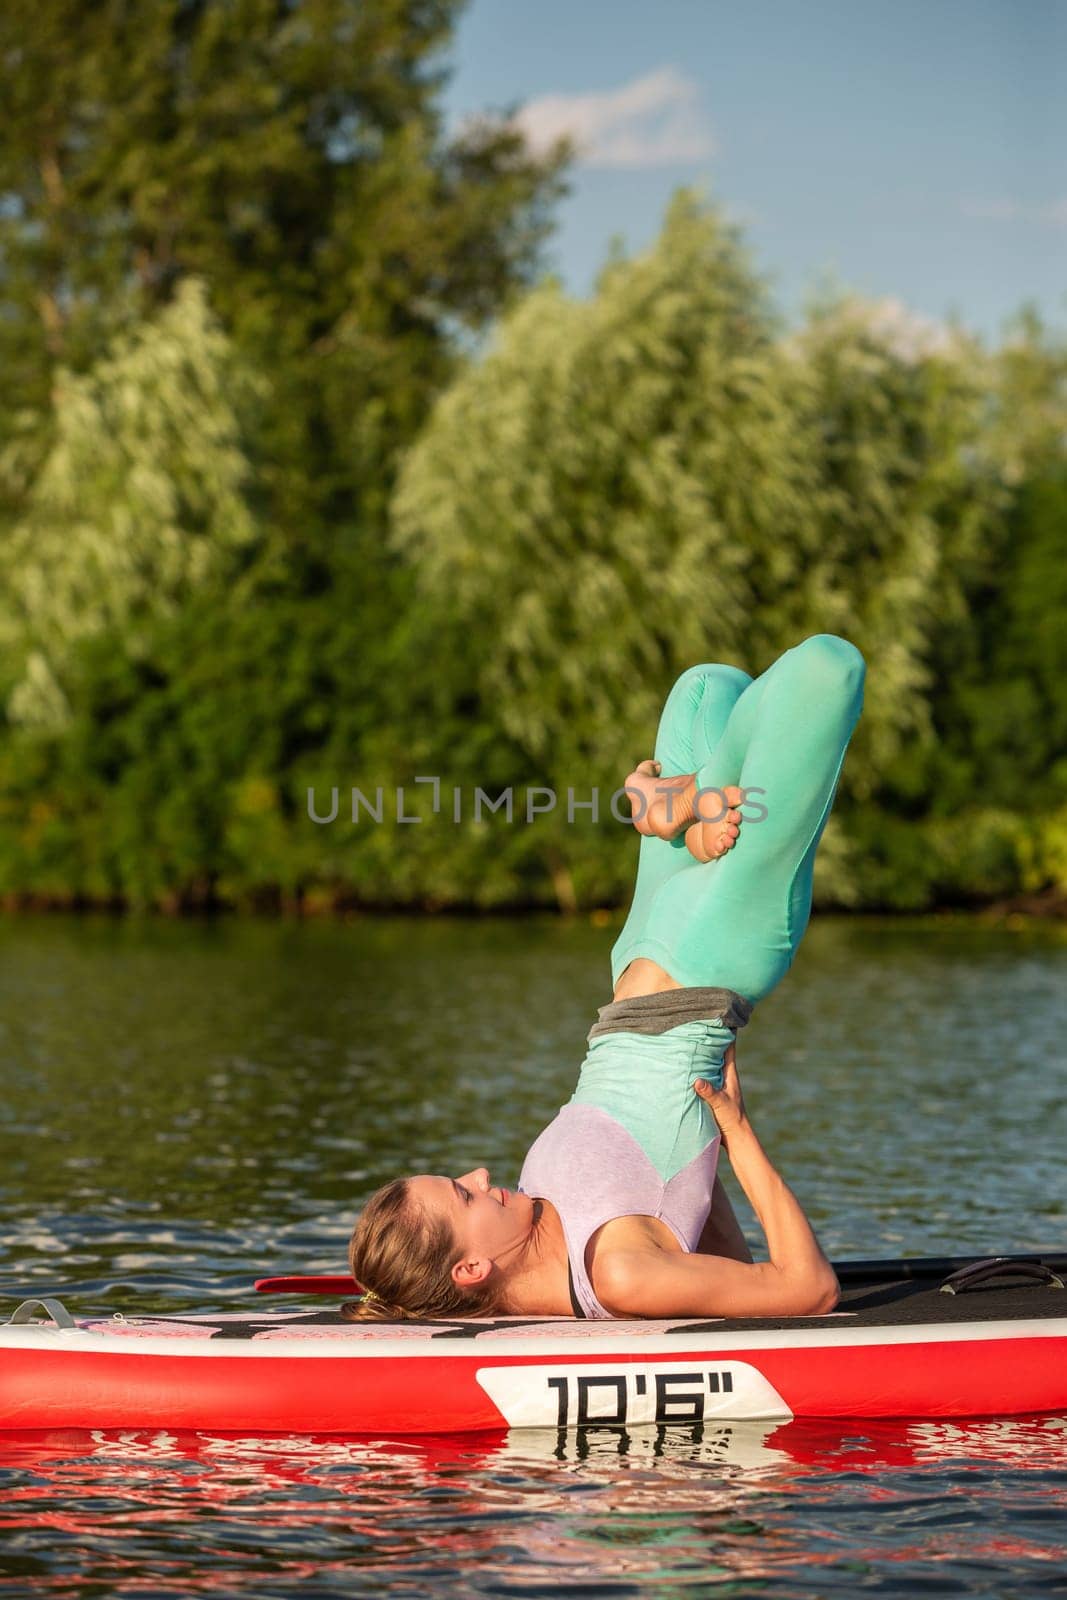 Woman practicing yoga on the paddle board in the morning. Sport. Hobby. Yoga.